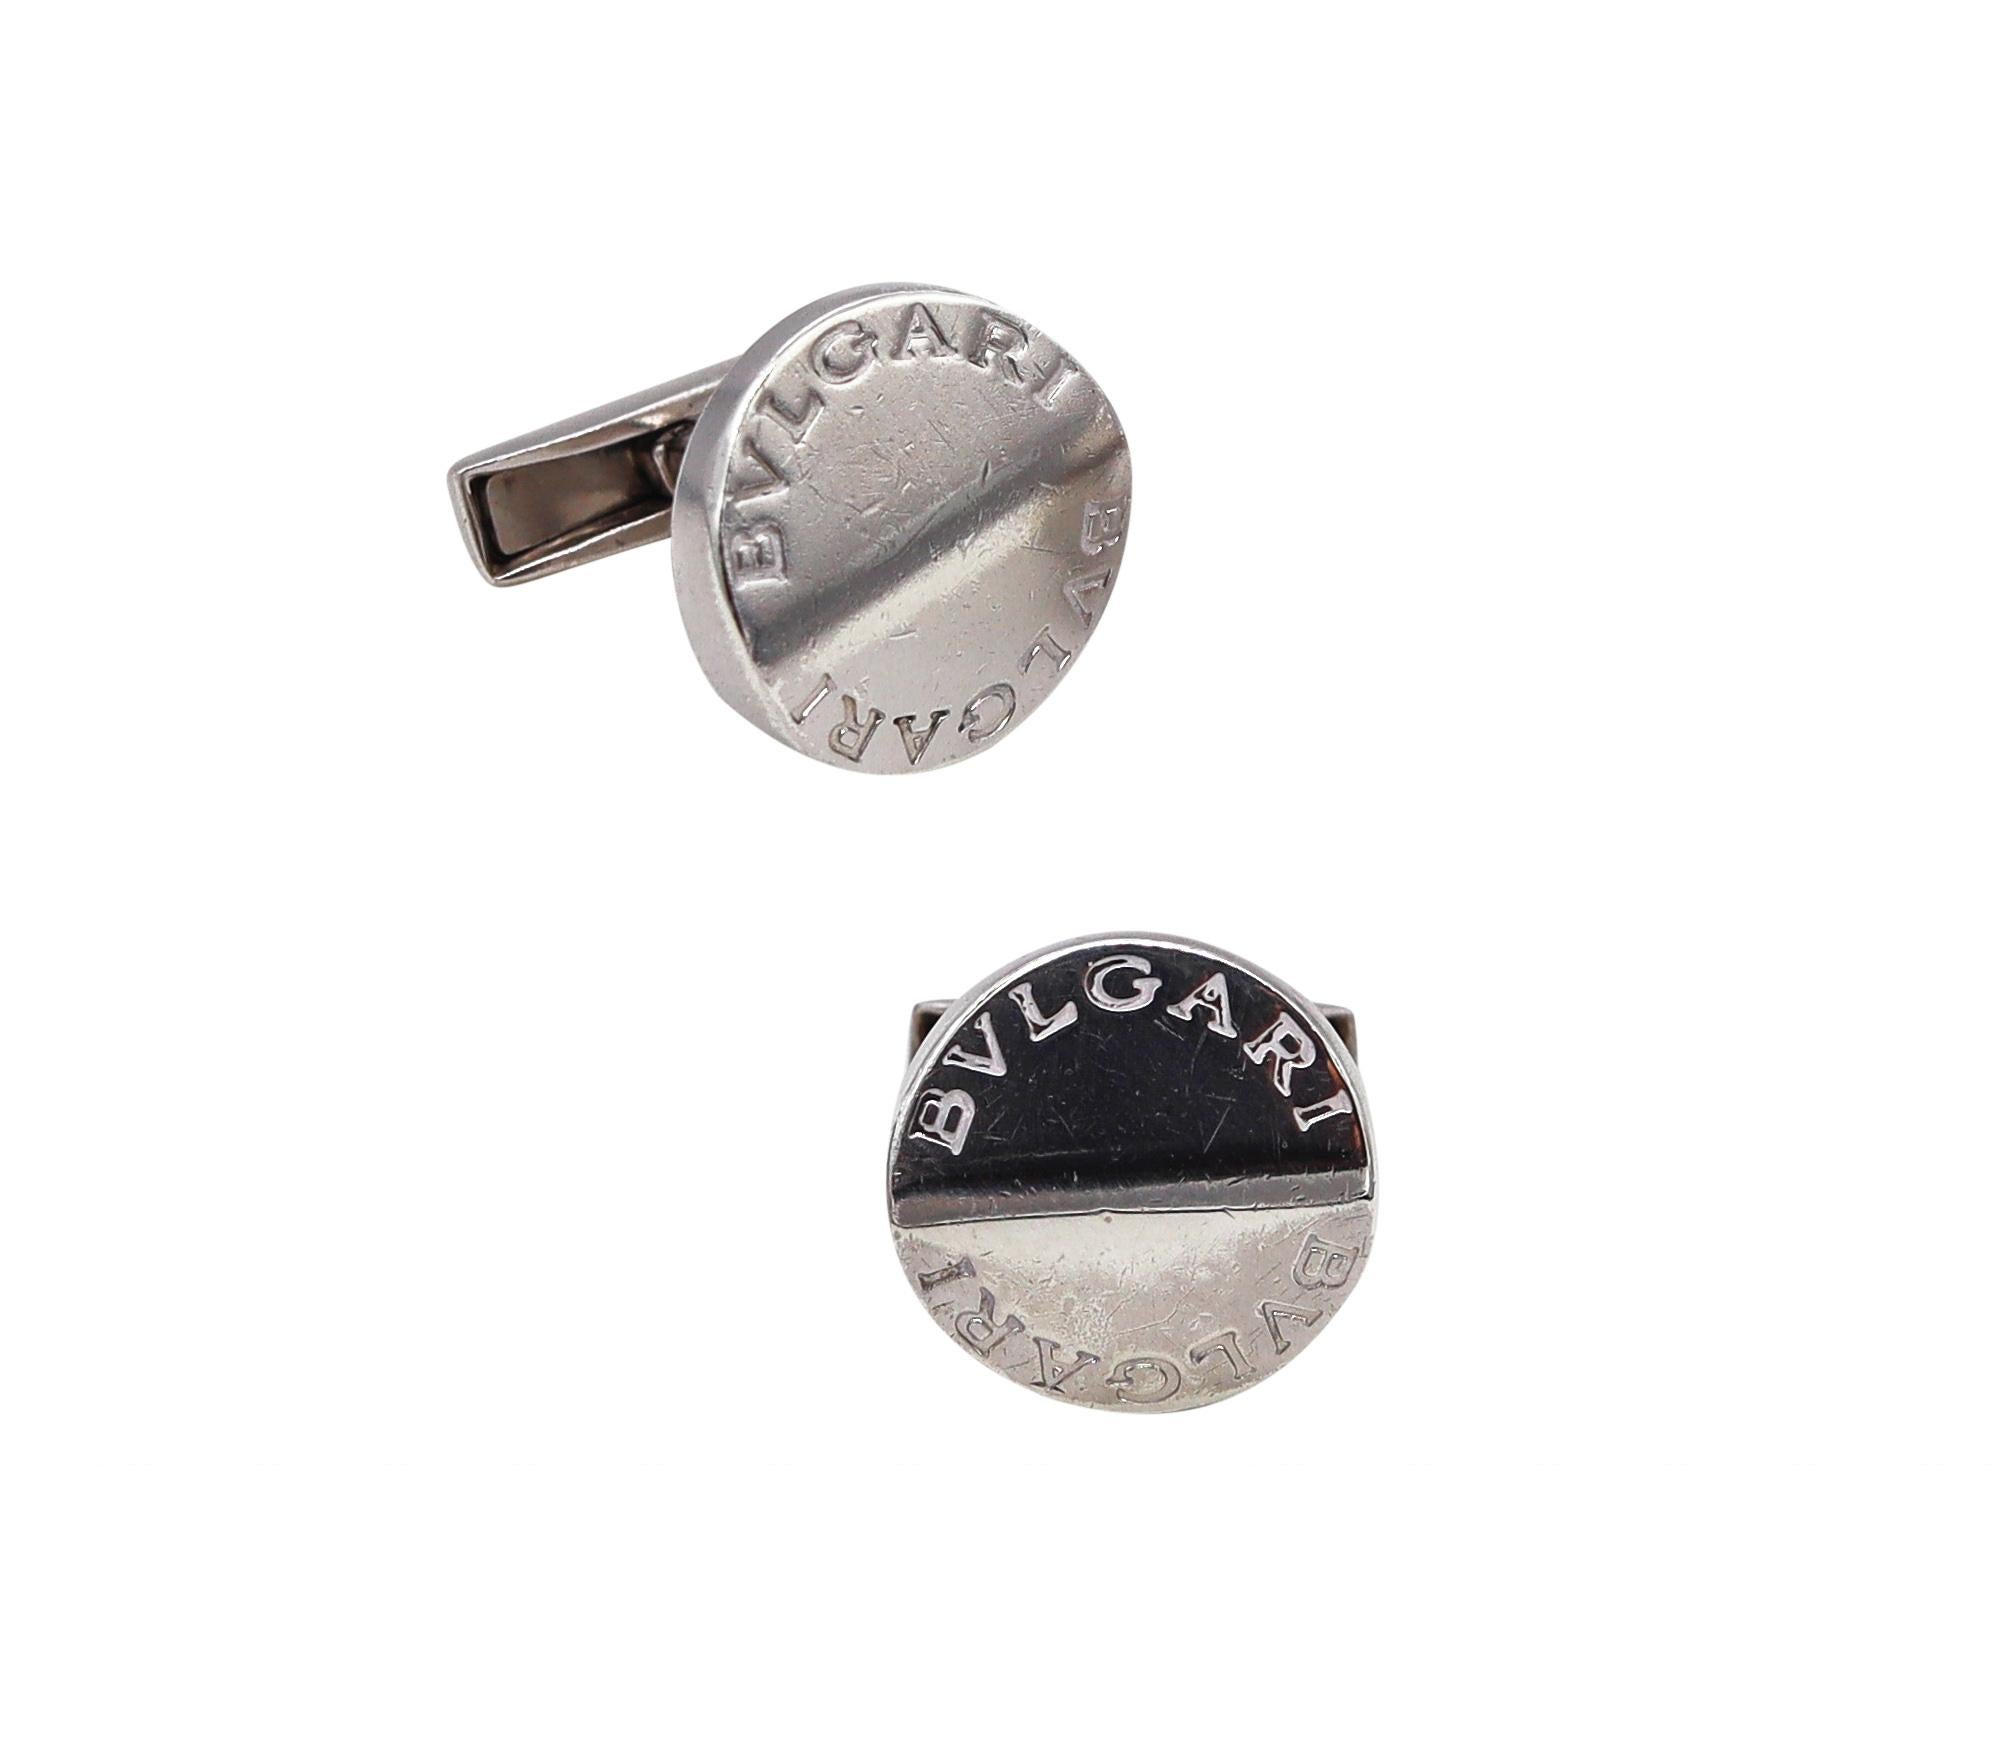 Pair of cufflinks designed by Bvlgari.

Beautiful sleek pieces, made in Rome Italy by the house of Bvlgari. They was crafted in solid .925/.999 sterling silver featuring the double name of Bvlgari and suited with movable backs for comfort